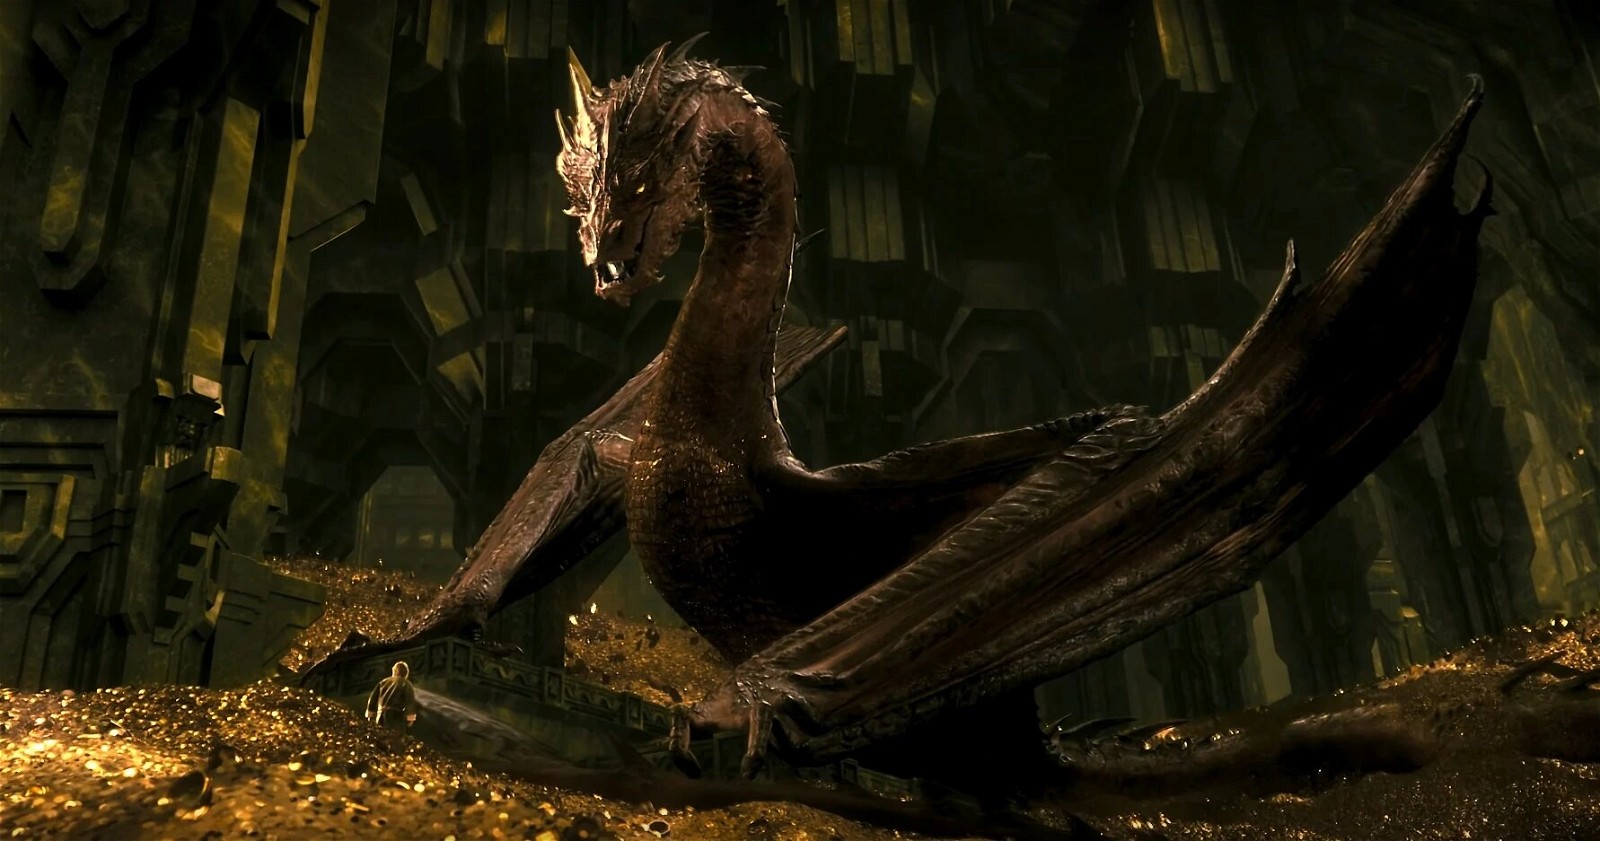 Benedict Cumberbatch was the voice behind Smaug